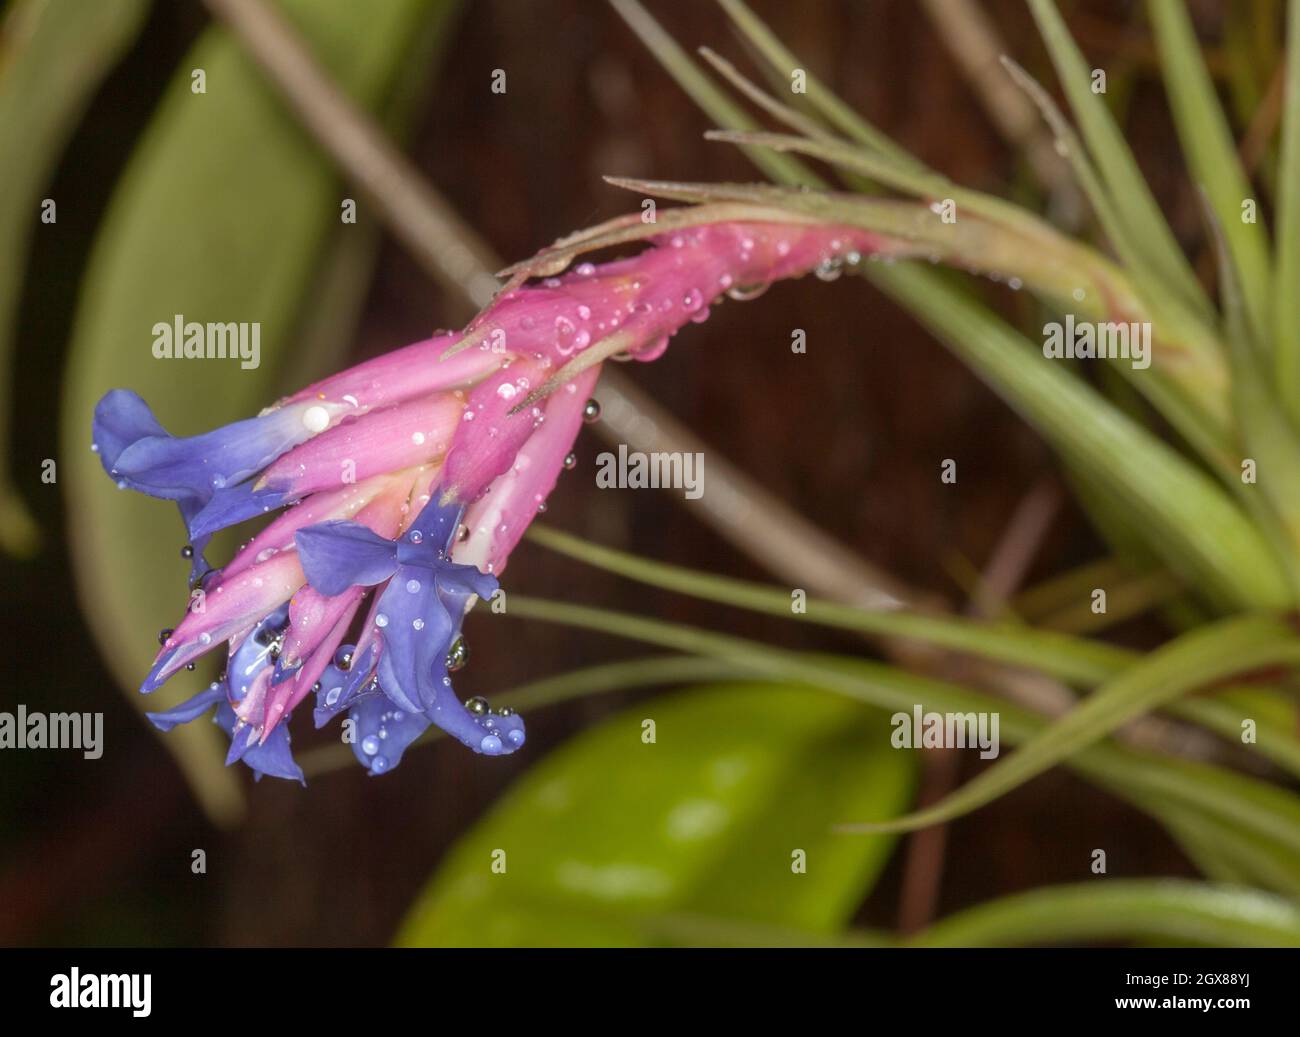 Flowers and foliage of Tillandsia aeranthos', a bromeliad, air plant, with beautiful blue flowers and pink bracts covered with raindrops Stock Photo